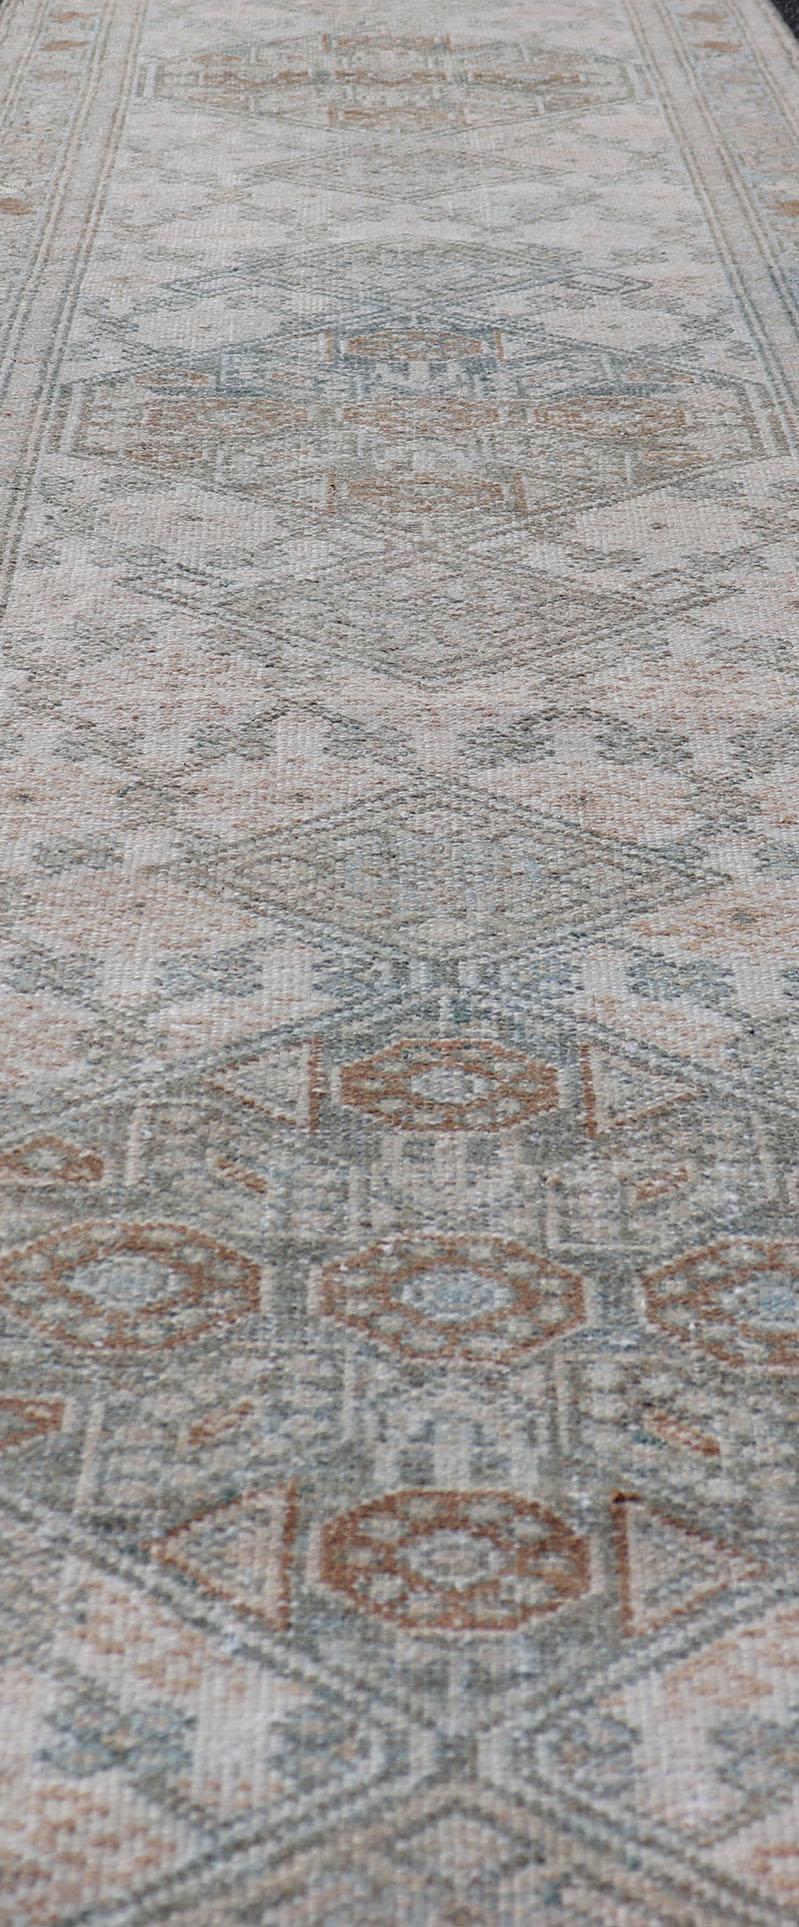 Antique Persian Sarab Runner with Sub-Geometric Design in Light Blue, Tan, Grey For Sale 1